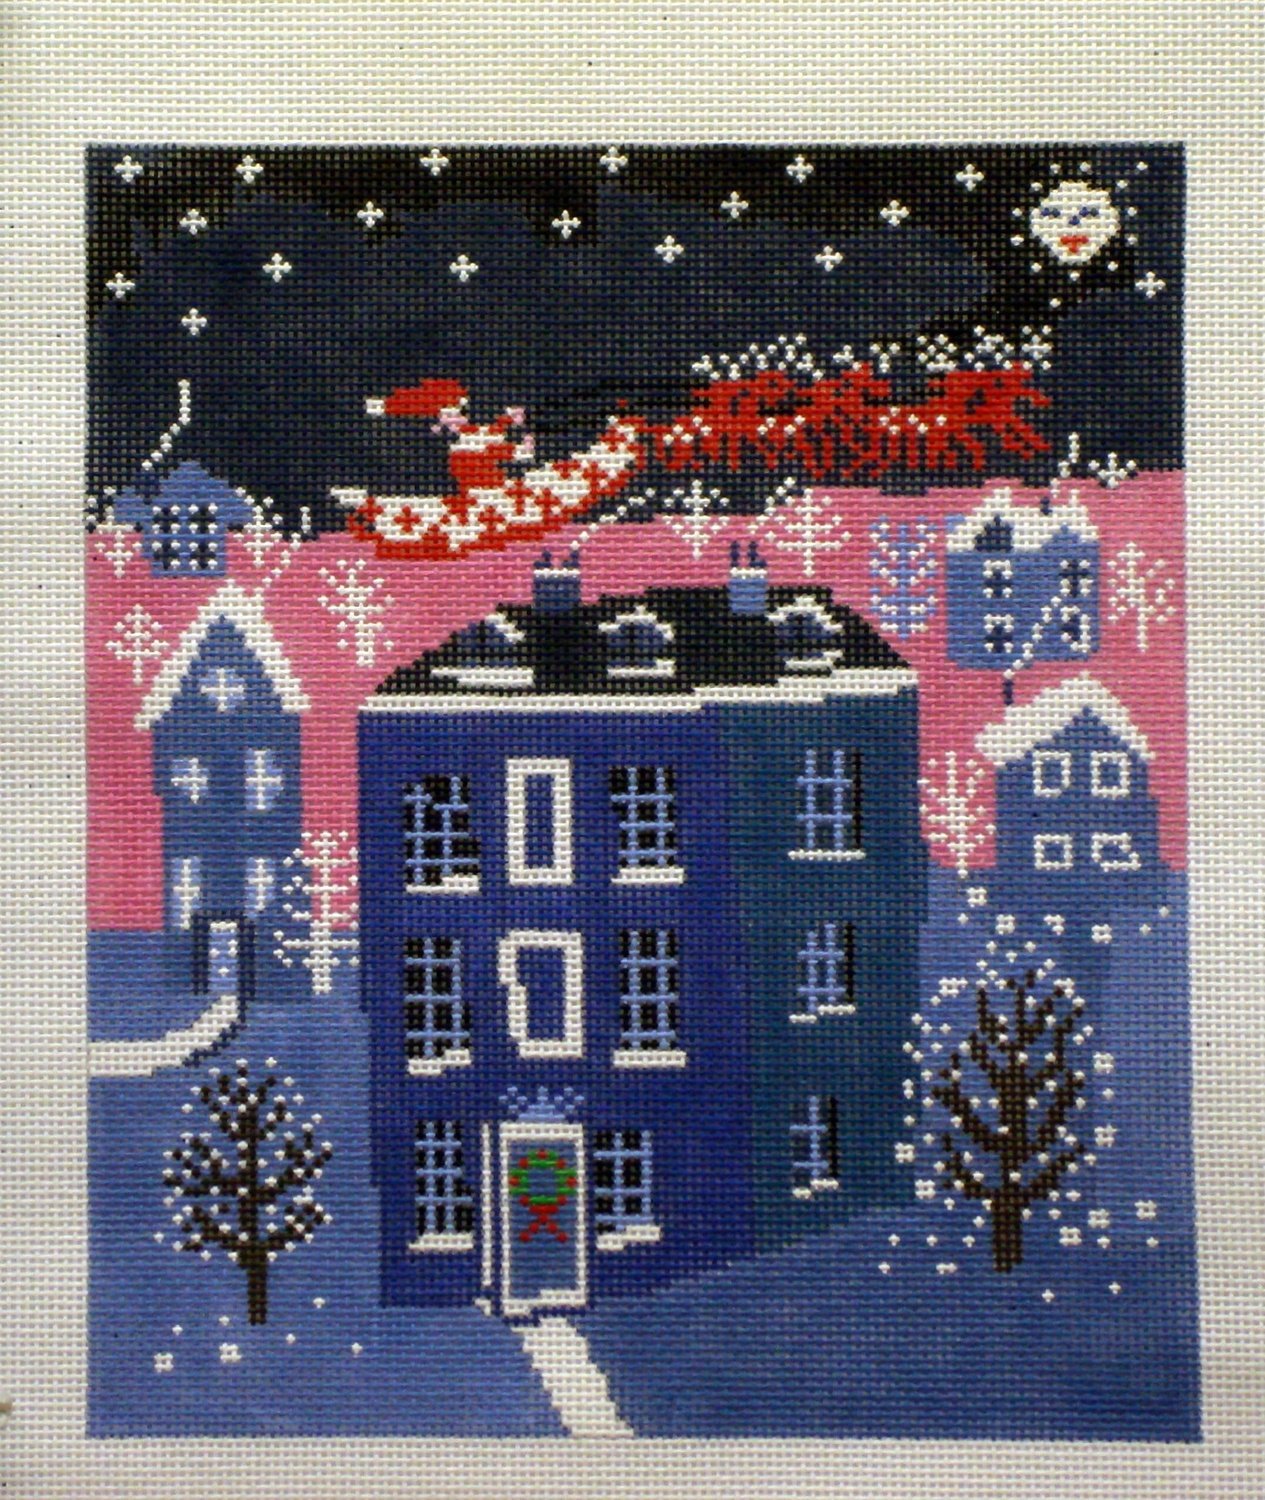 Christmas Eve (Handpainted needlepoint canvas by Birds of a Feather)